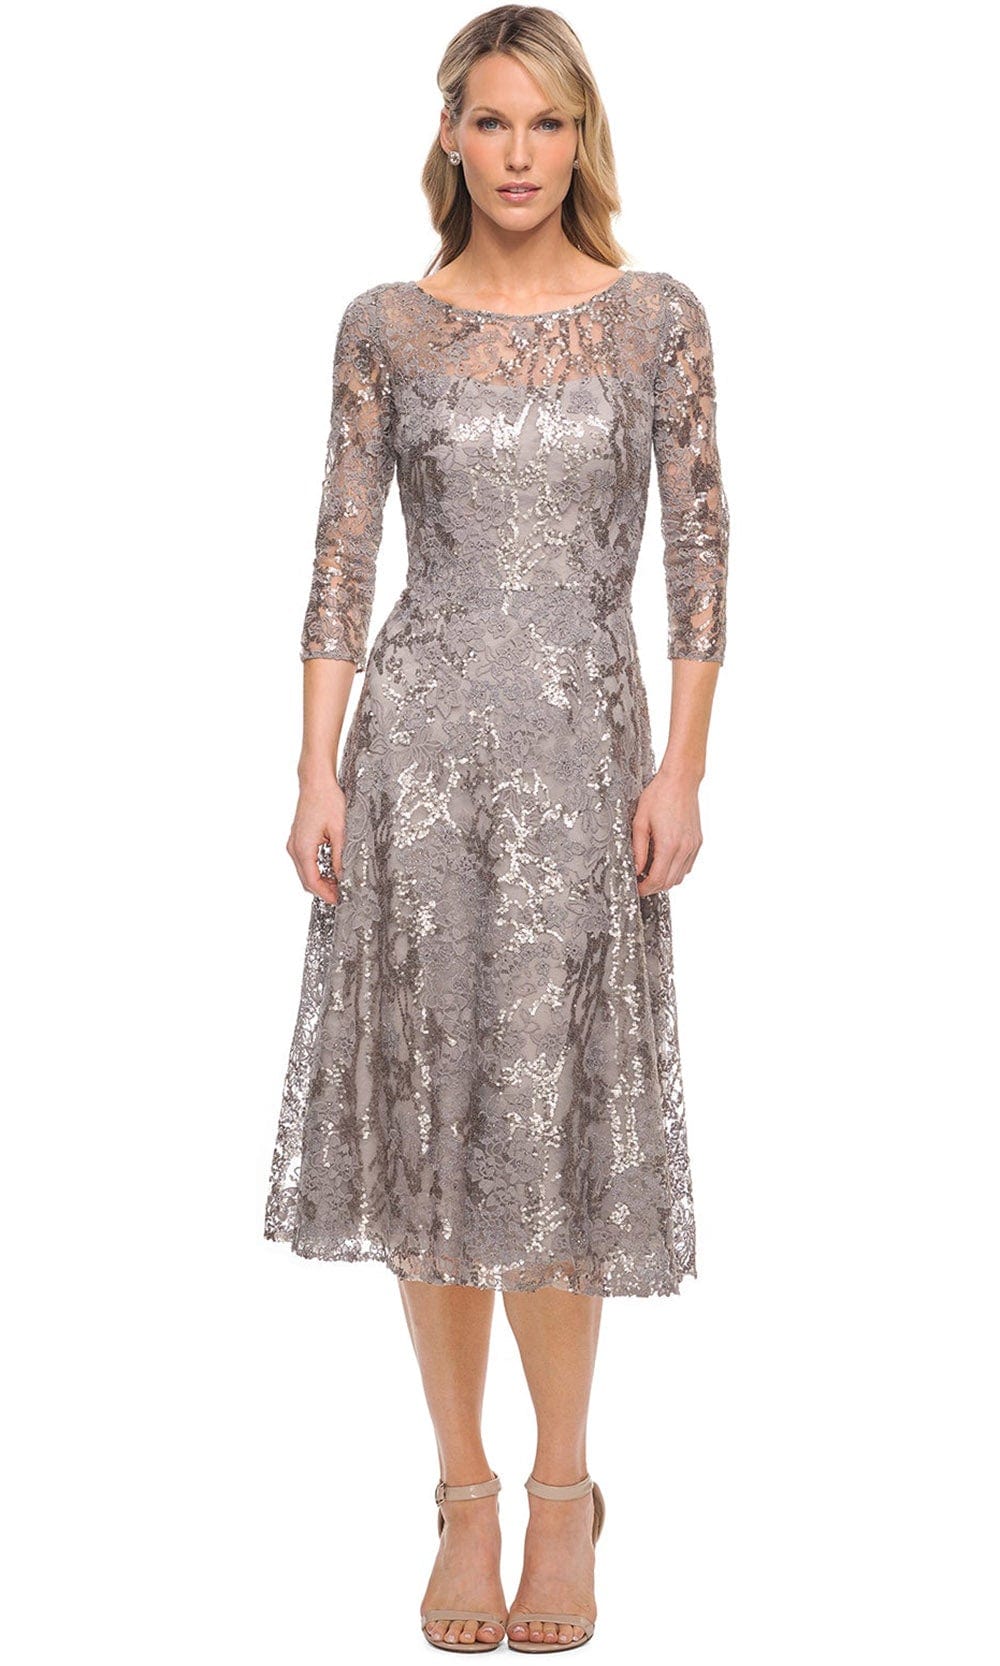 La Femme 29993 - Sparkly Embroidered Tea Length Dress Special Occasion Dress 4 / Silver